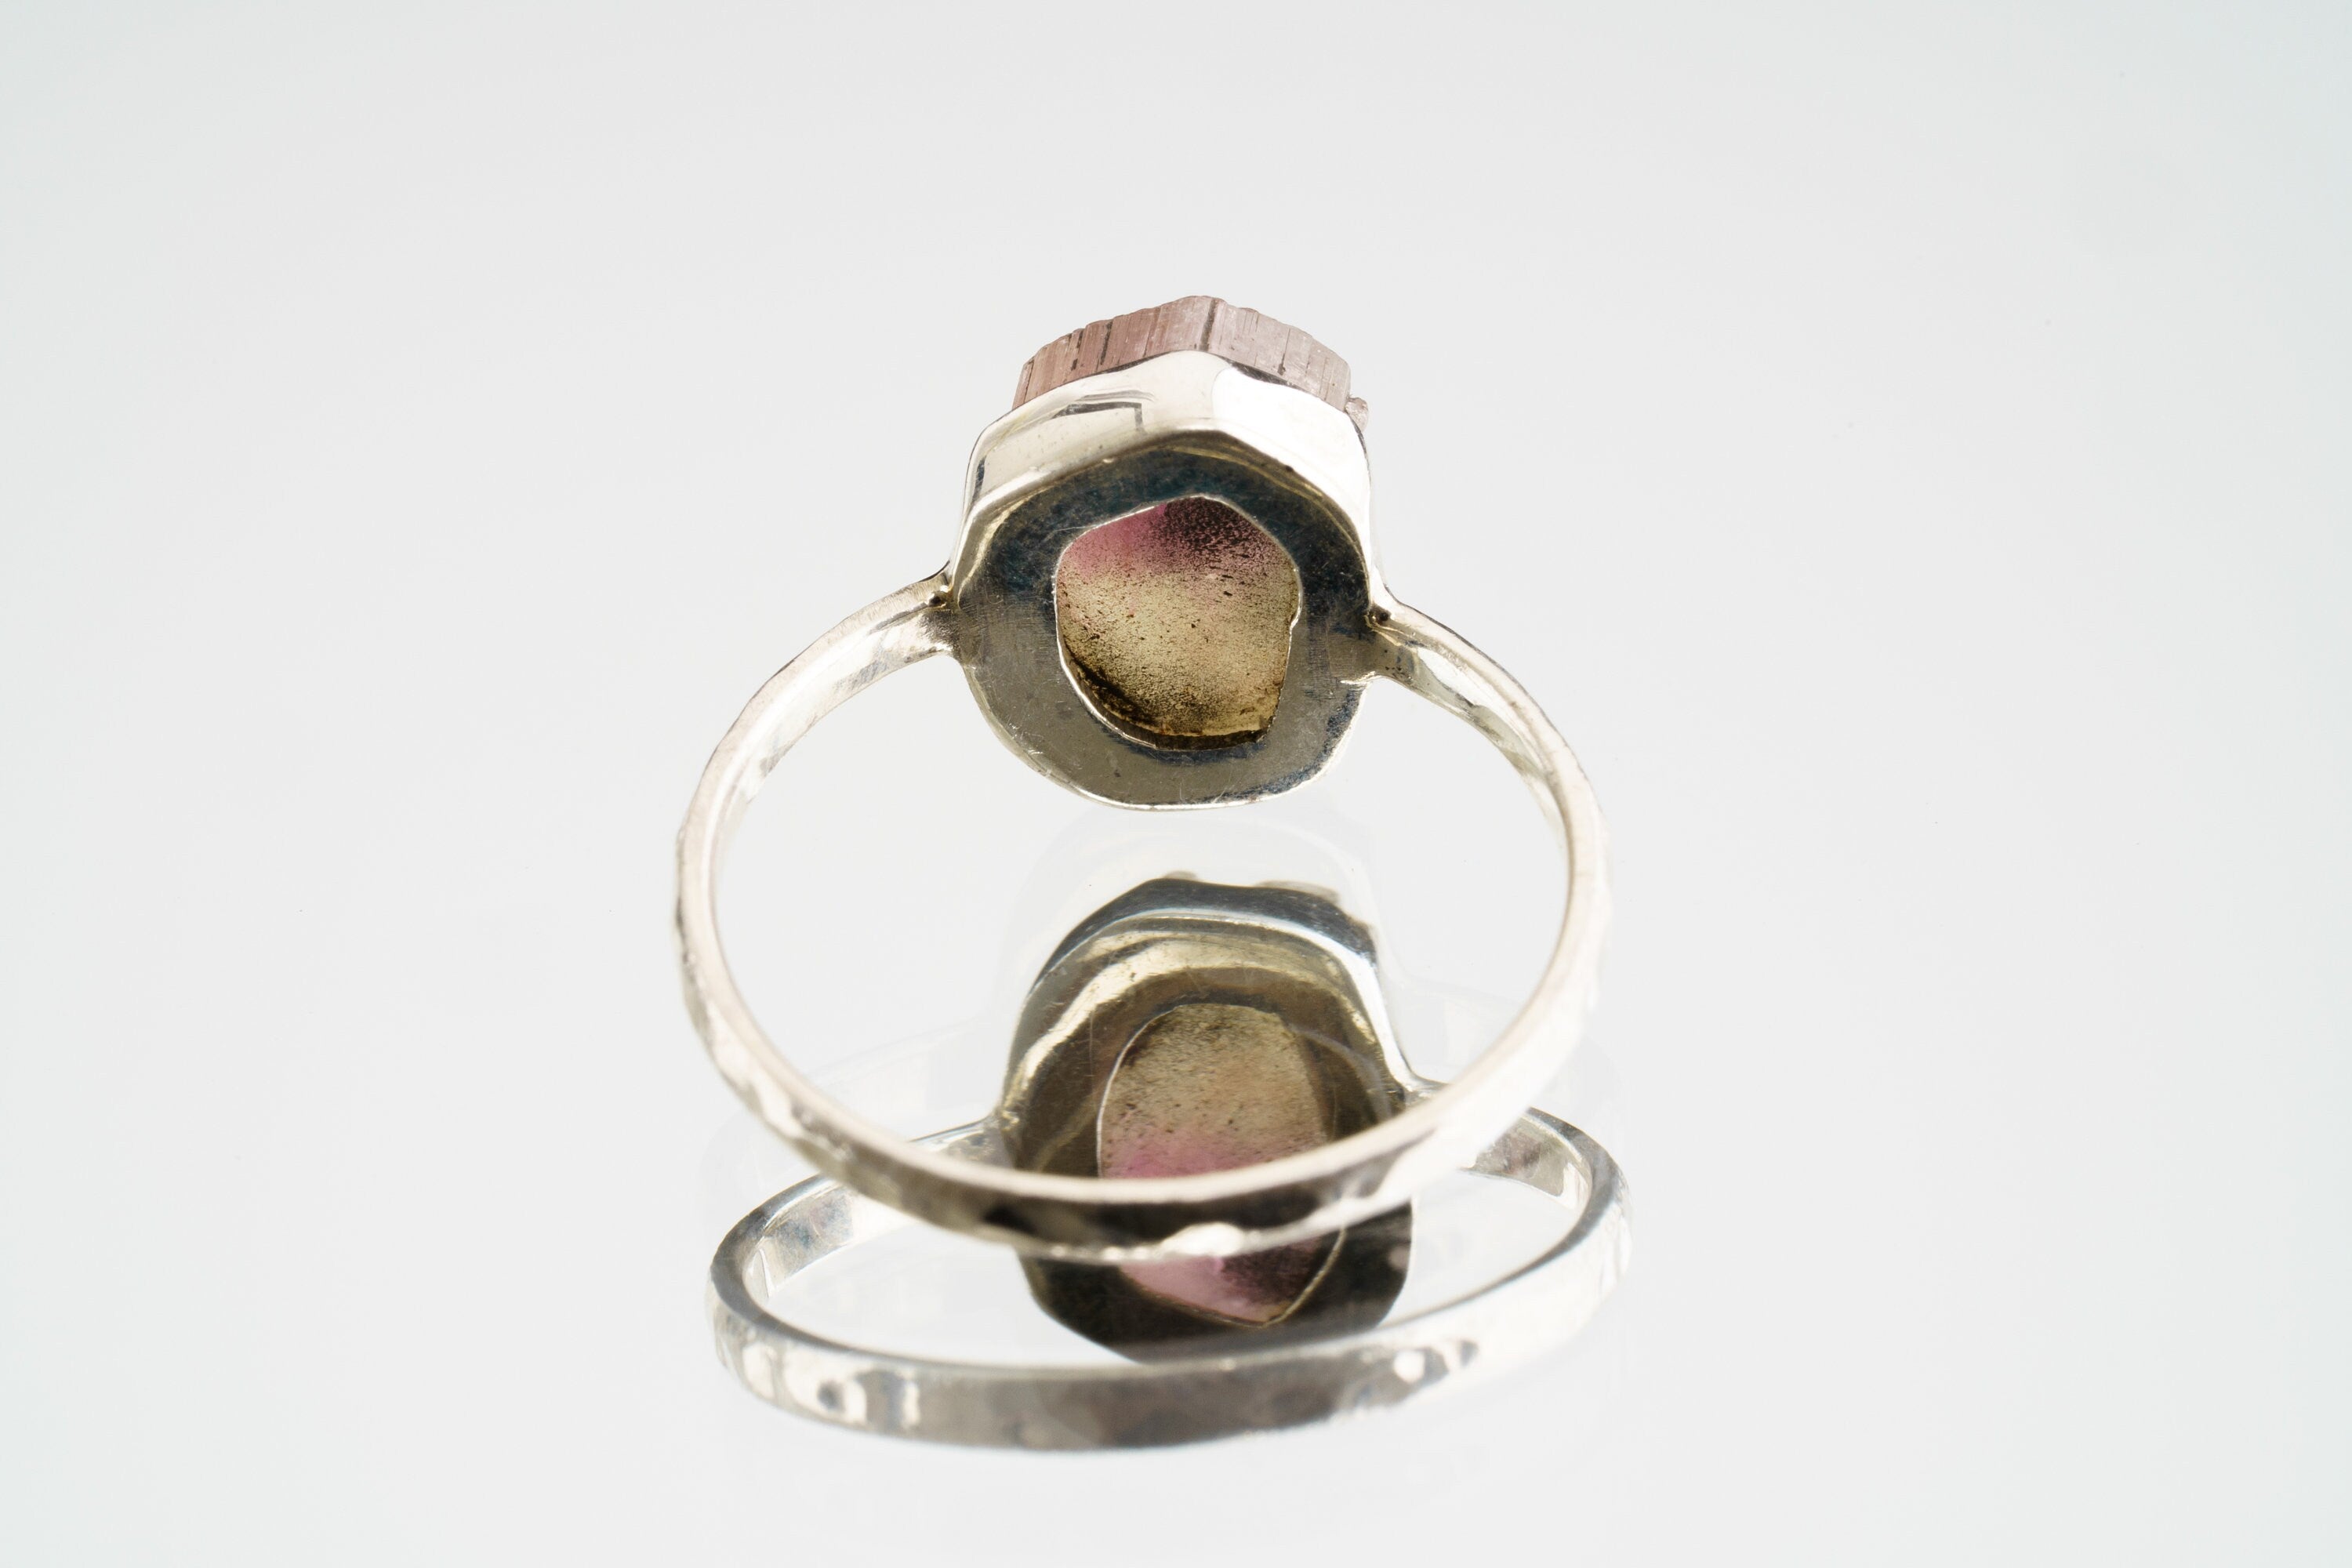 Bicolour Pink gem Tourmaline - Stack Crystal Ring - Size 5 3/4 US - 925 Sterling Silver - Thin Band Hammer Textured